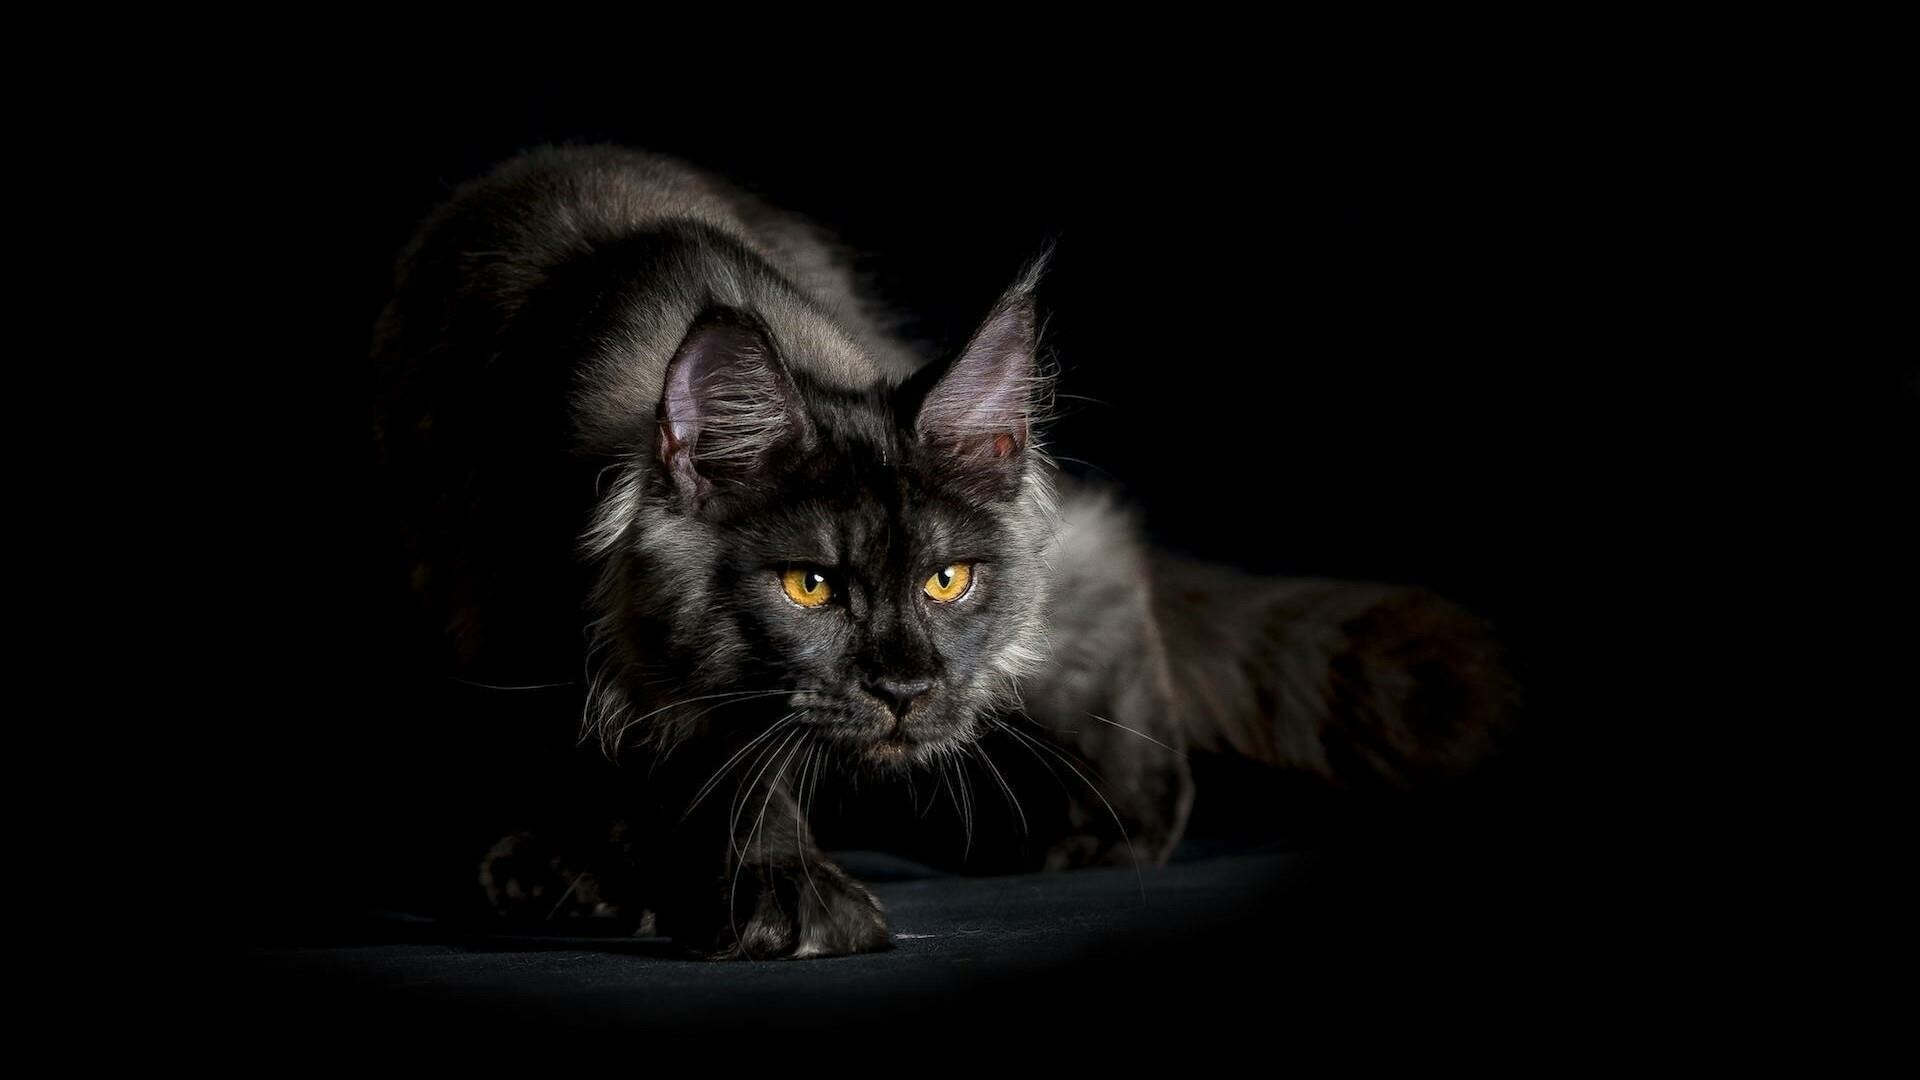 Maine Coon: A solid and rugged cat, as is fit for a working cat. 1920x1080 Full HD Wallpaper.